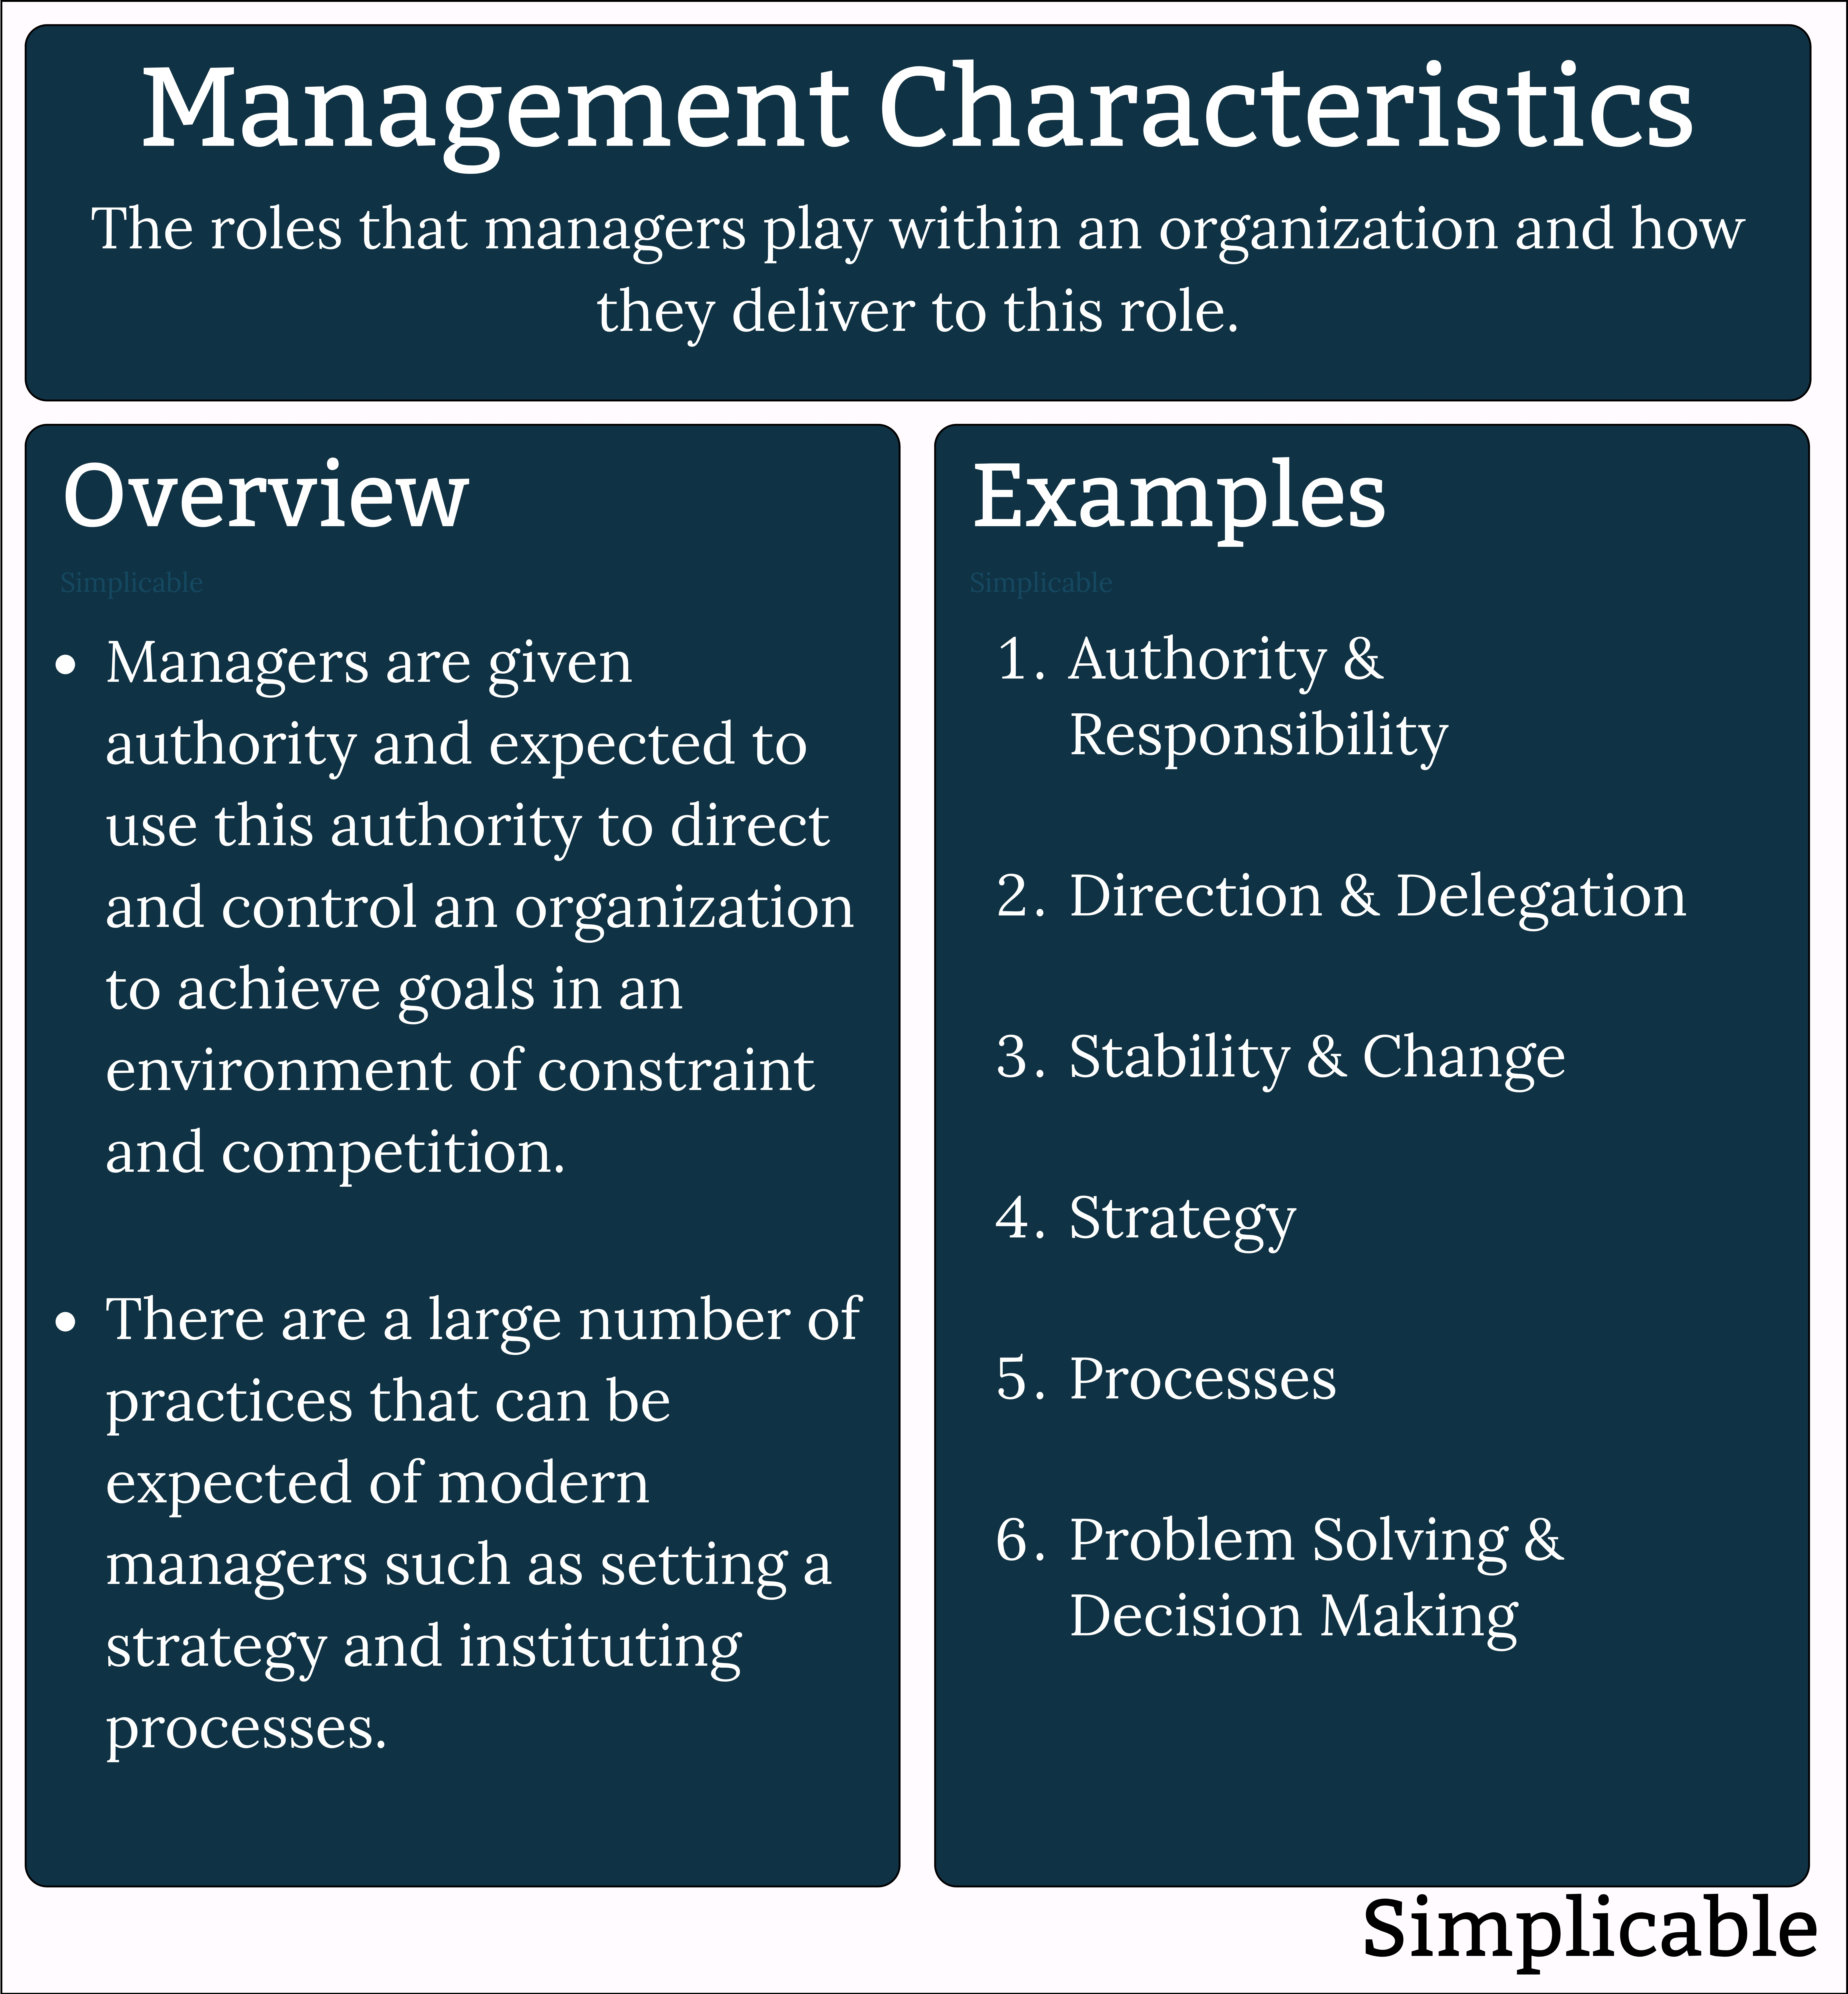 management characteristics overview and examples